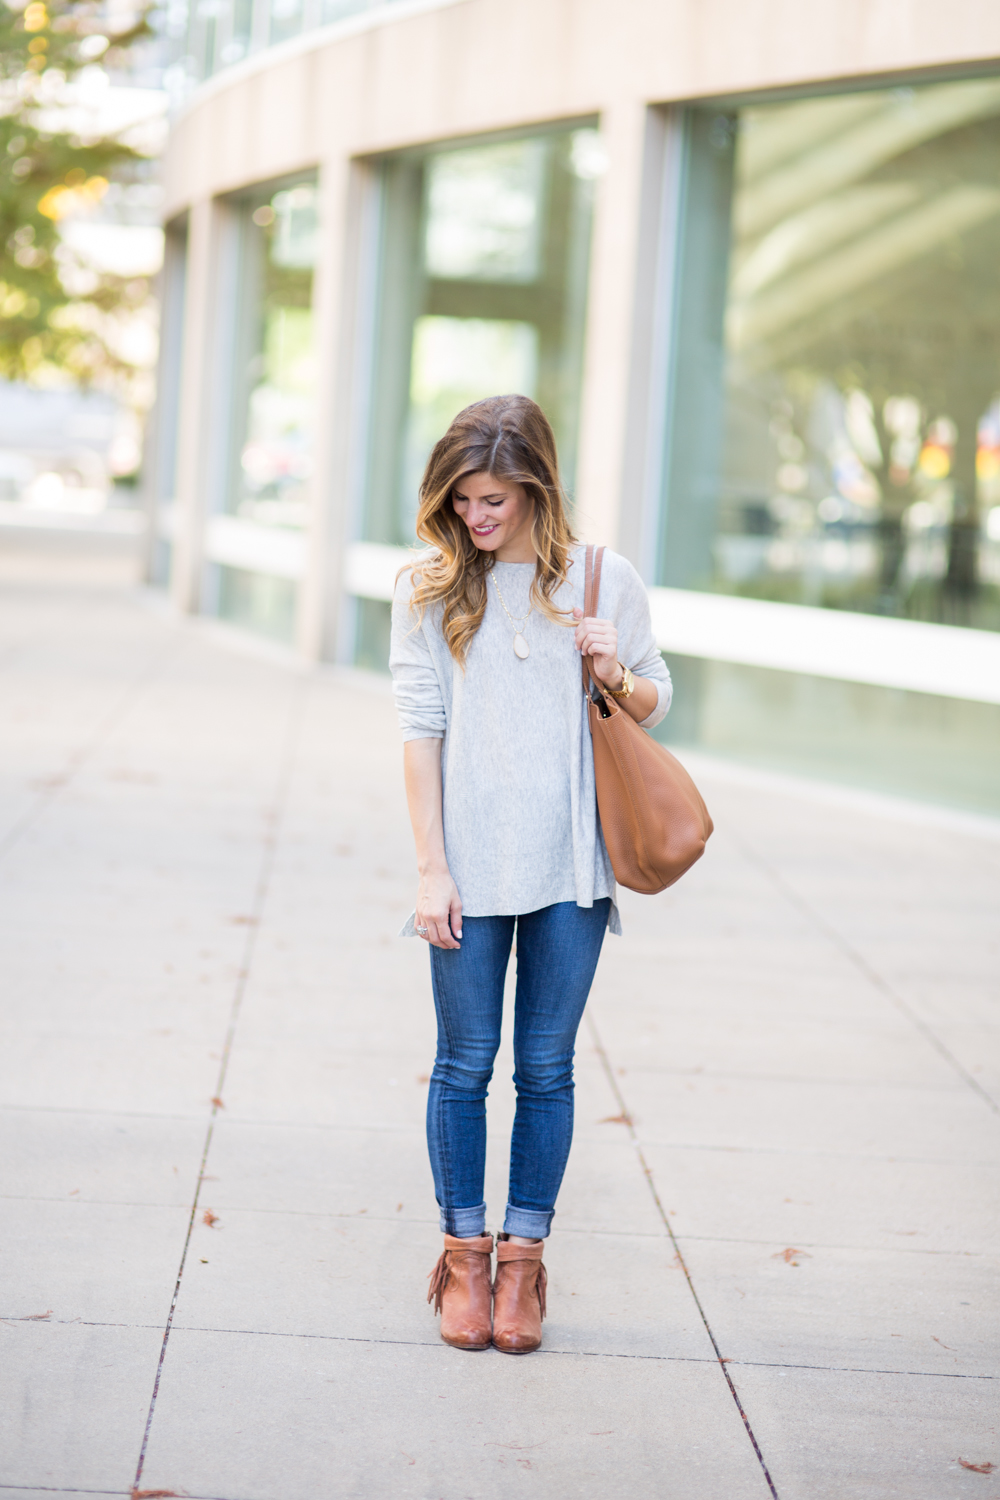 Simple Grey Sweater outfit with cognac booties and tote